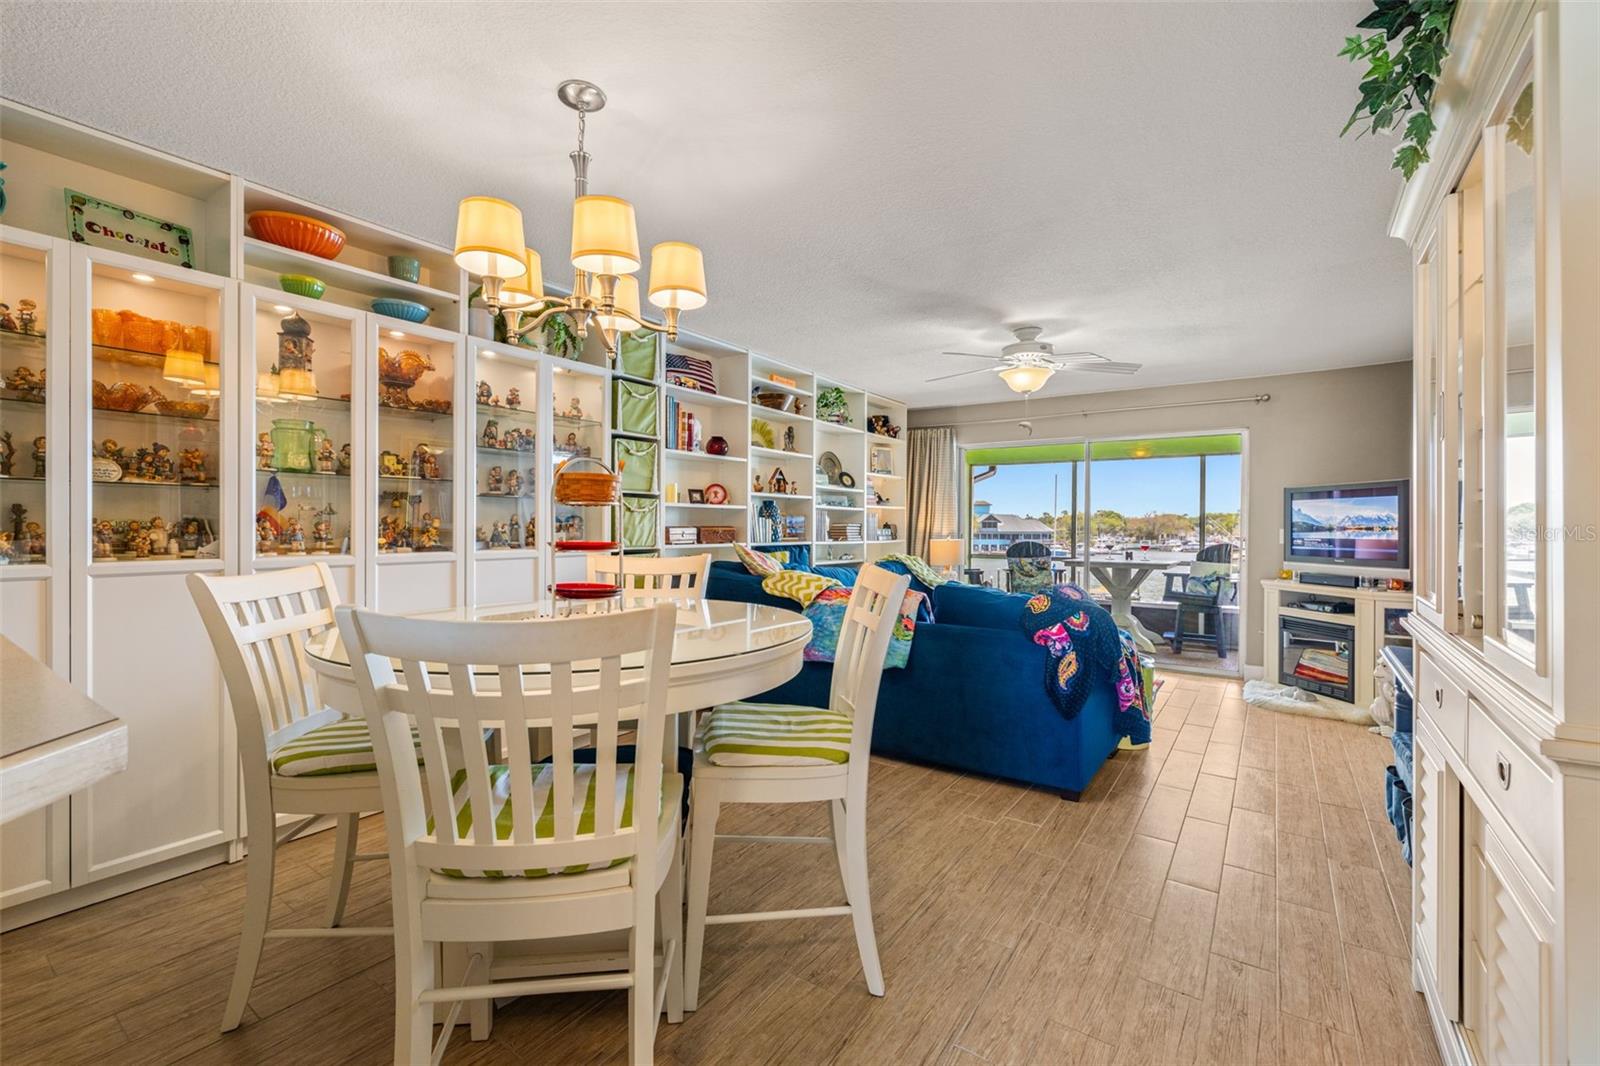 Spacious dining room/living room combo with porcelain wood plank tiles, custom built-in cabinets & shelving with lighting to display all those family photos or collectibles...all with an OCEAN view!